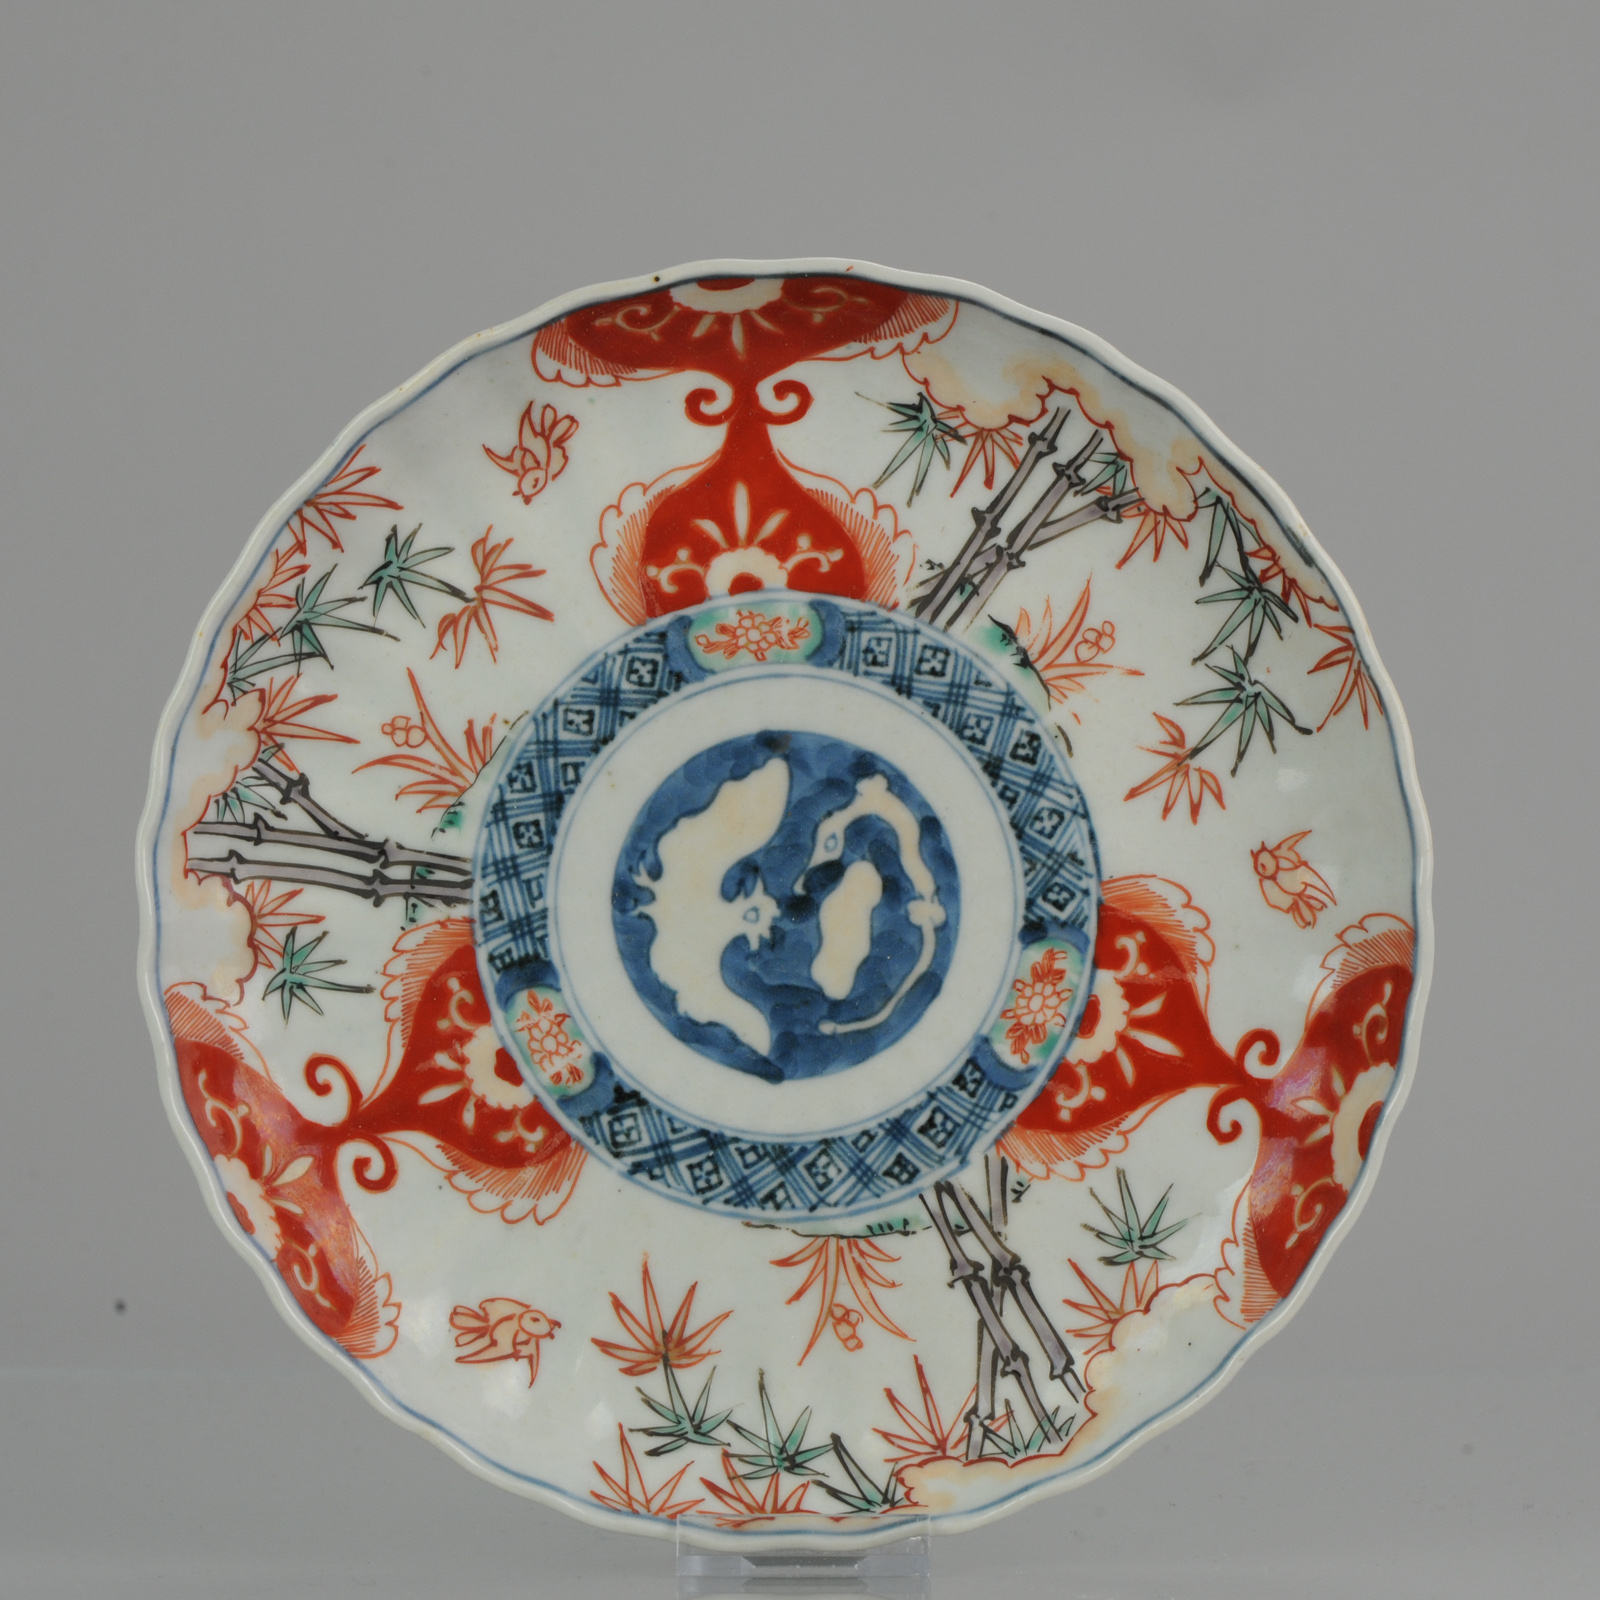 Antique Japanese Imari Charger with a floral scene Japan 19th c Porcelain Plate